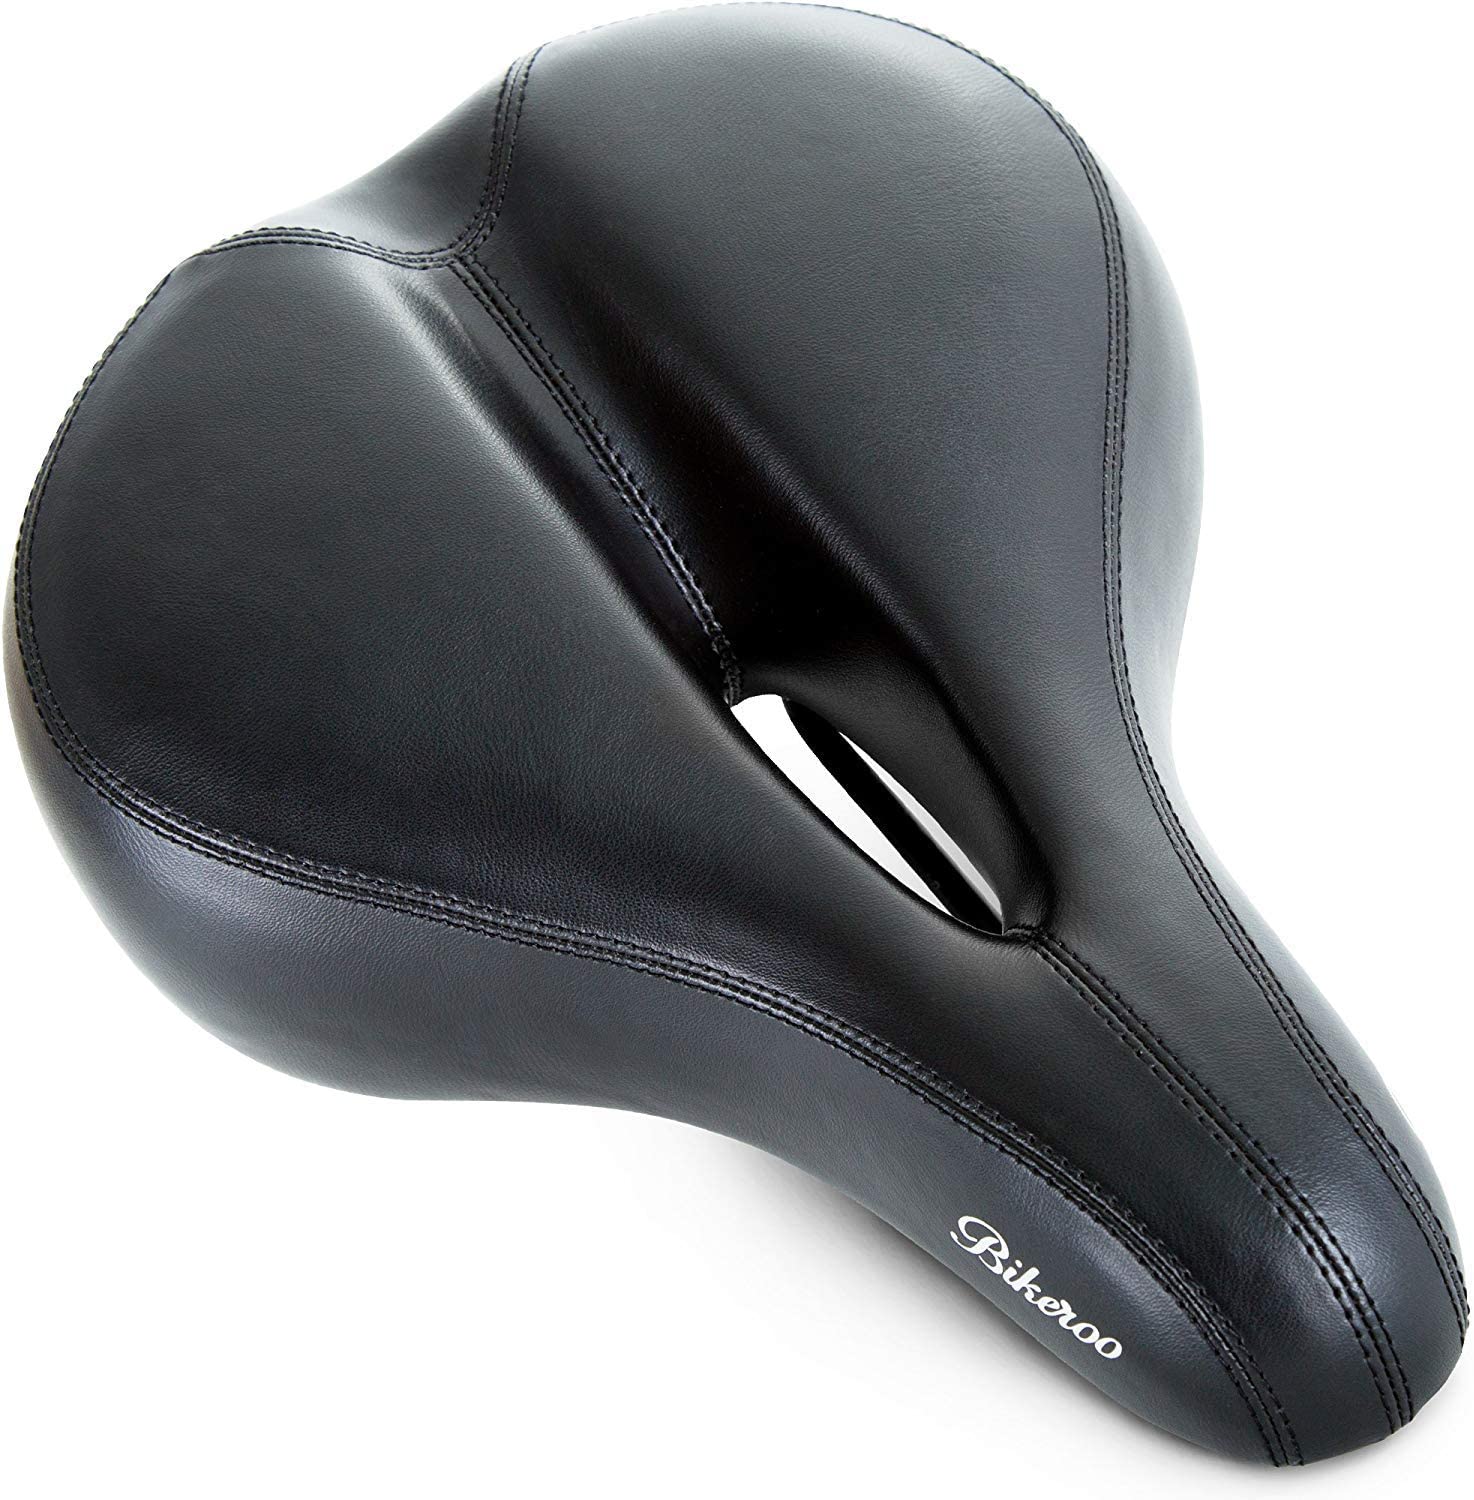 Bicycle Saddle Social Ride Cycle Co Bike Seat Designed for Comfort in Awesome Colors